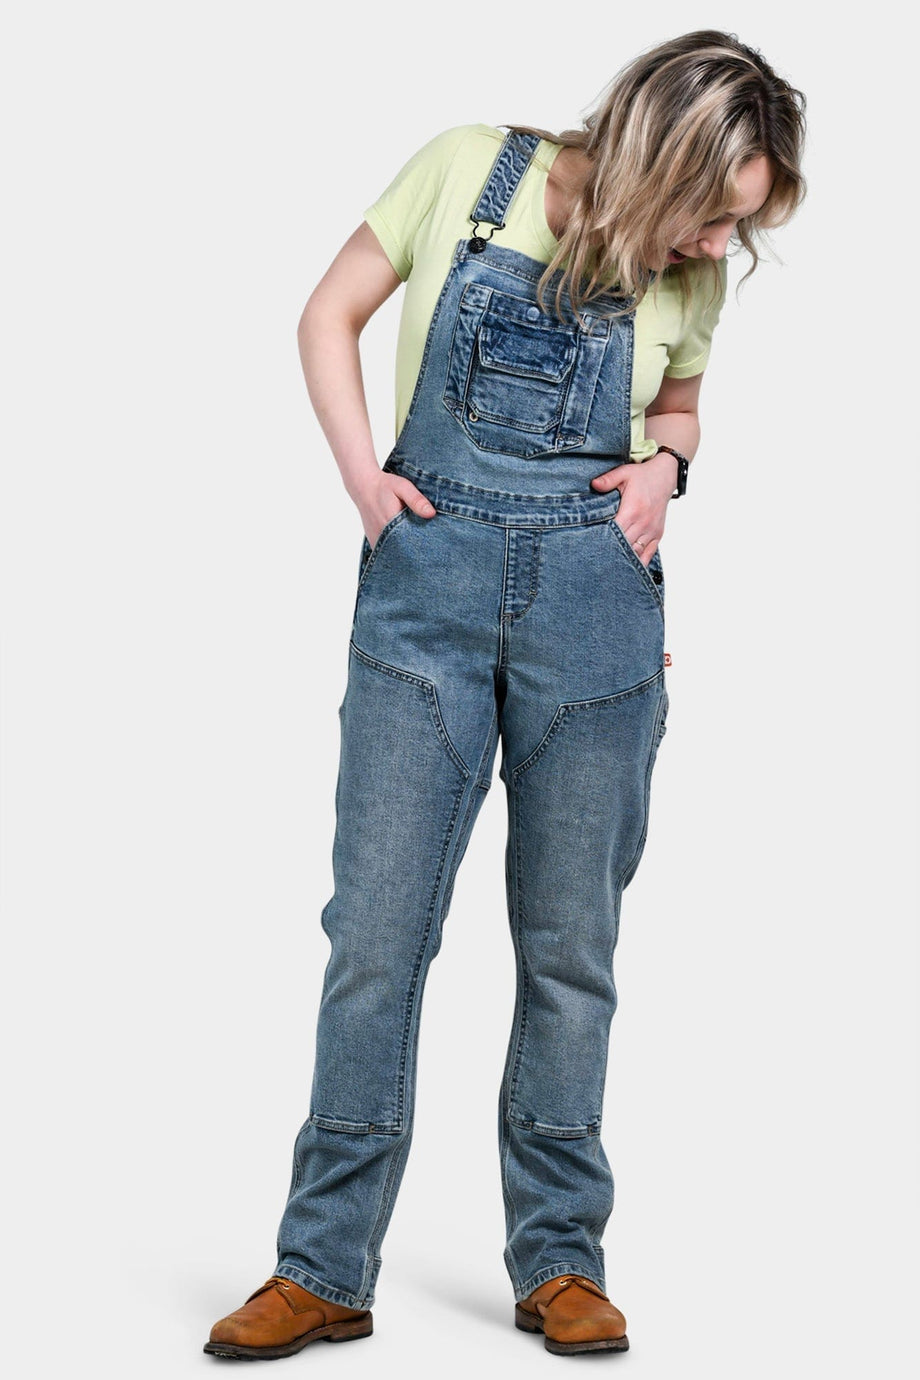 Womens Freshley Vintage Overalls | Dovetail Workwear